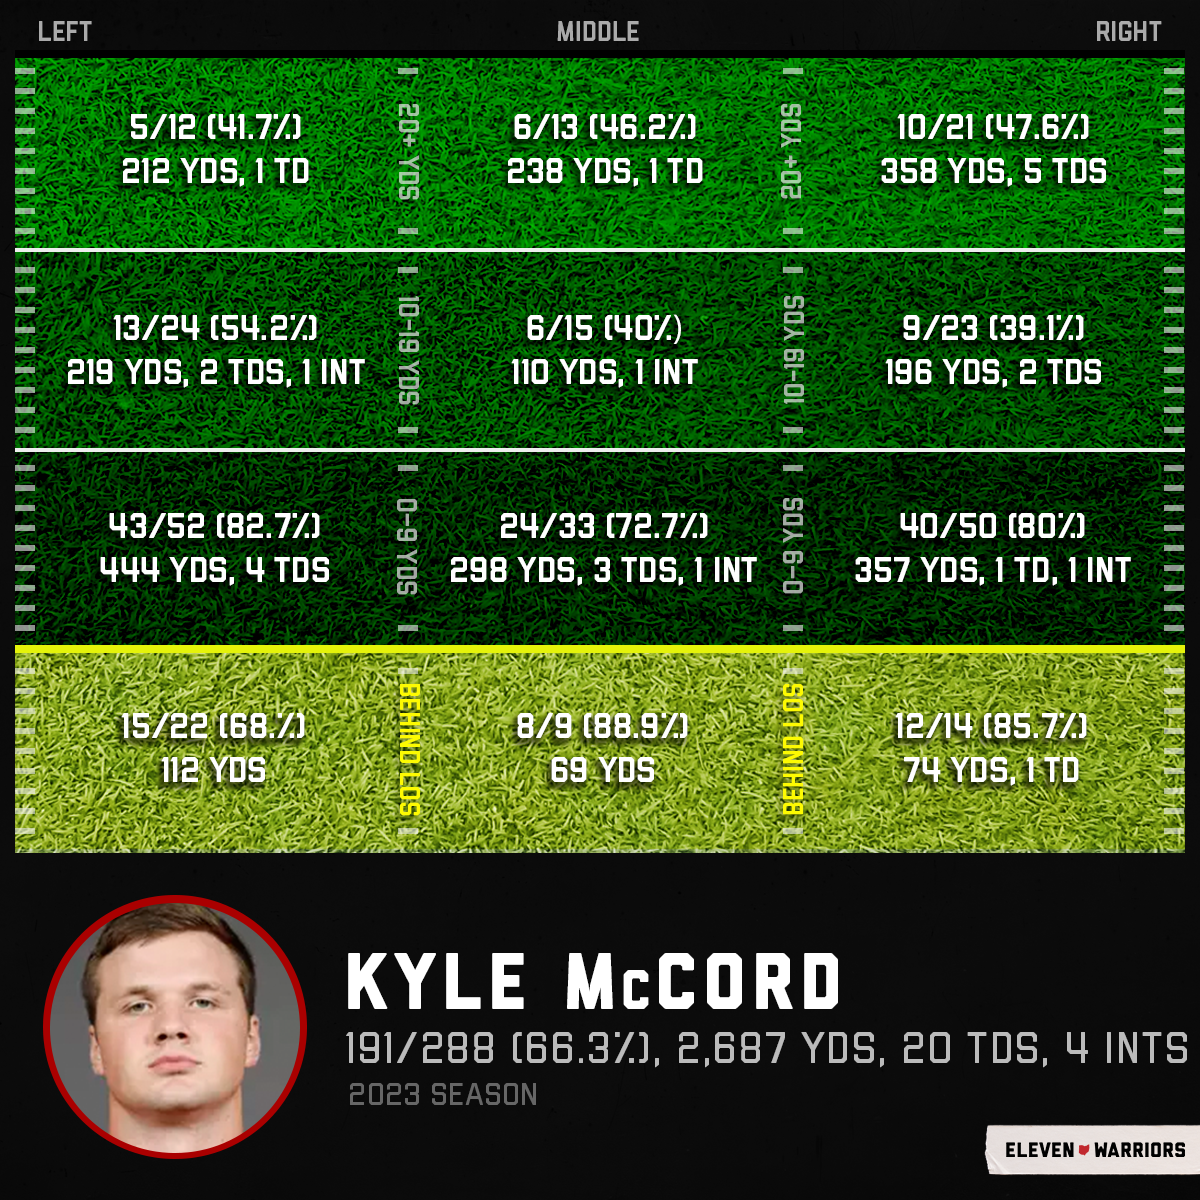 Kyle McCord's passing chart through 10 games in 2023